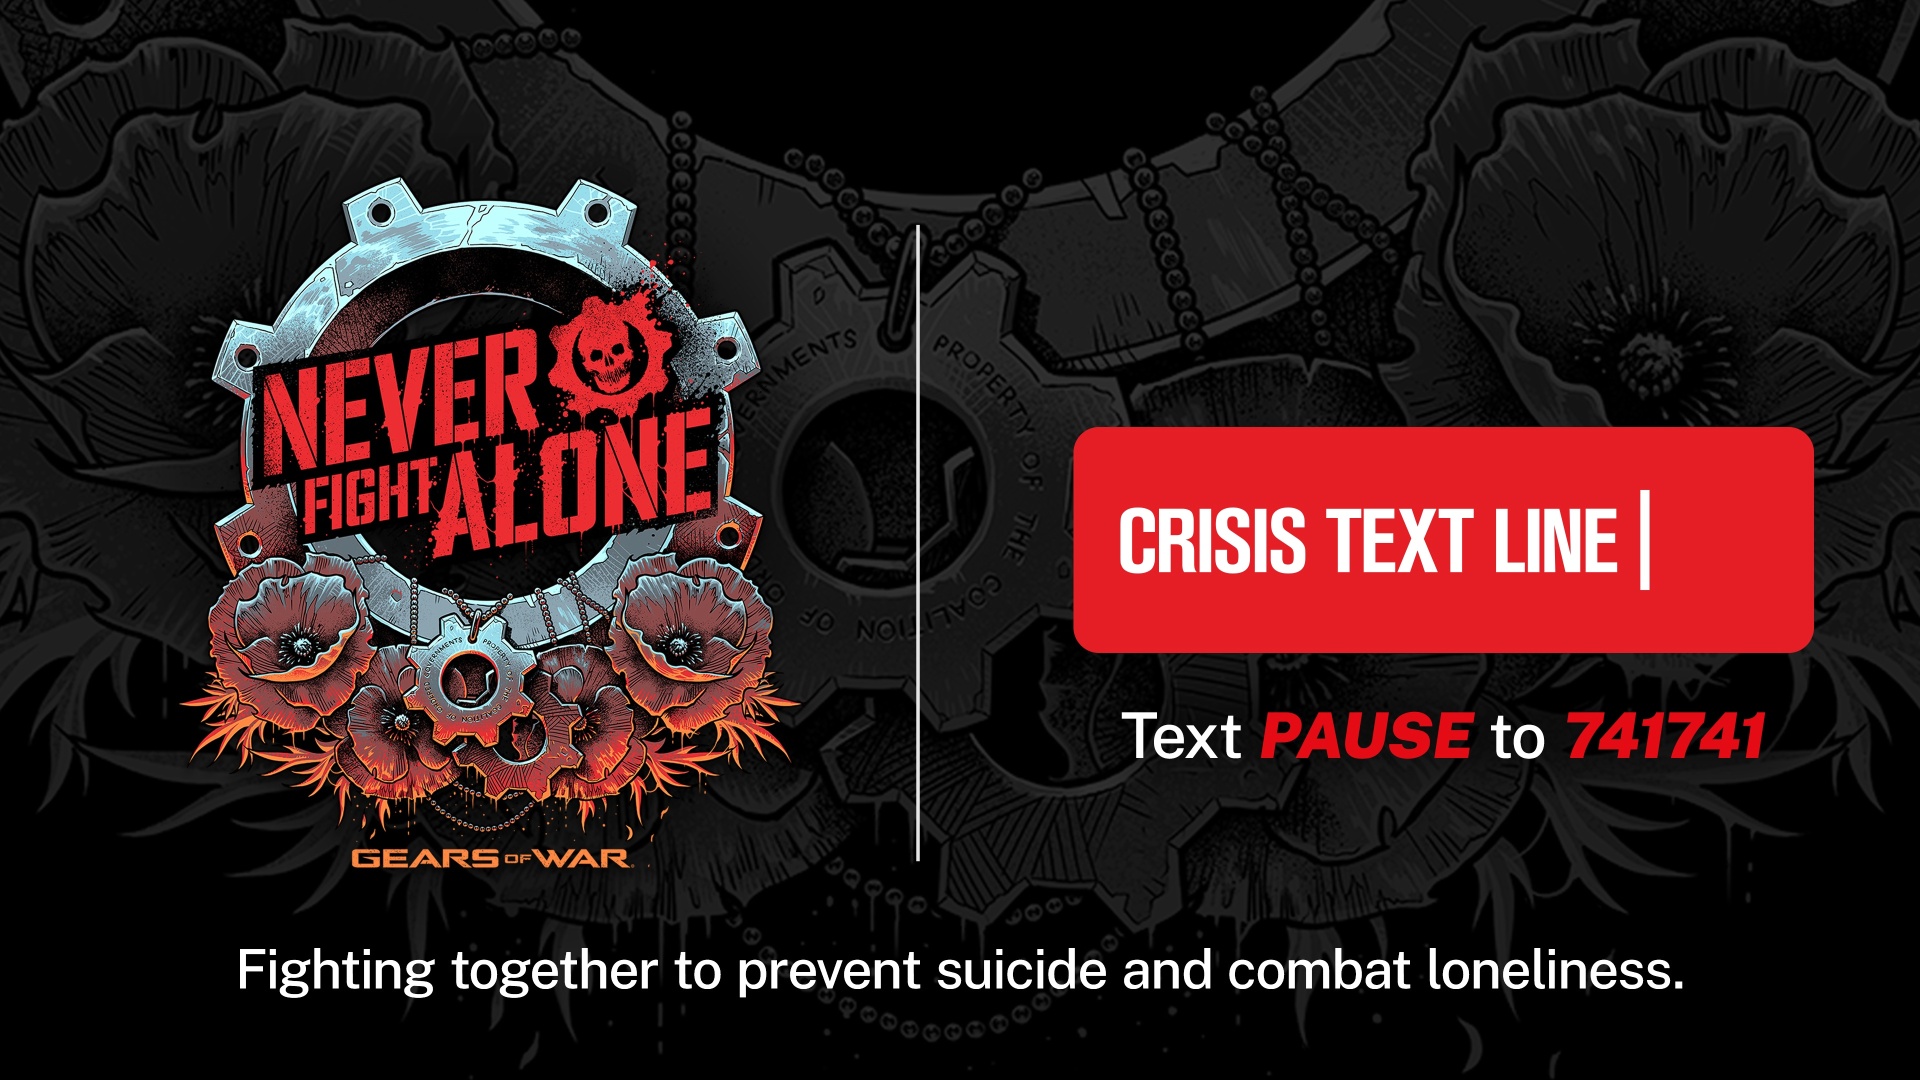 Gears - Never Fight Alone Hero Image with Crisis Text Line Number to Text PAUSE to 741741